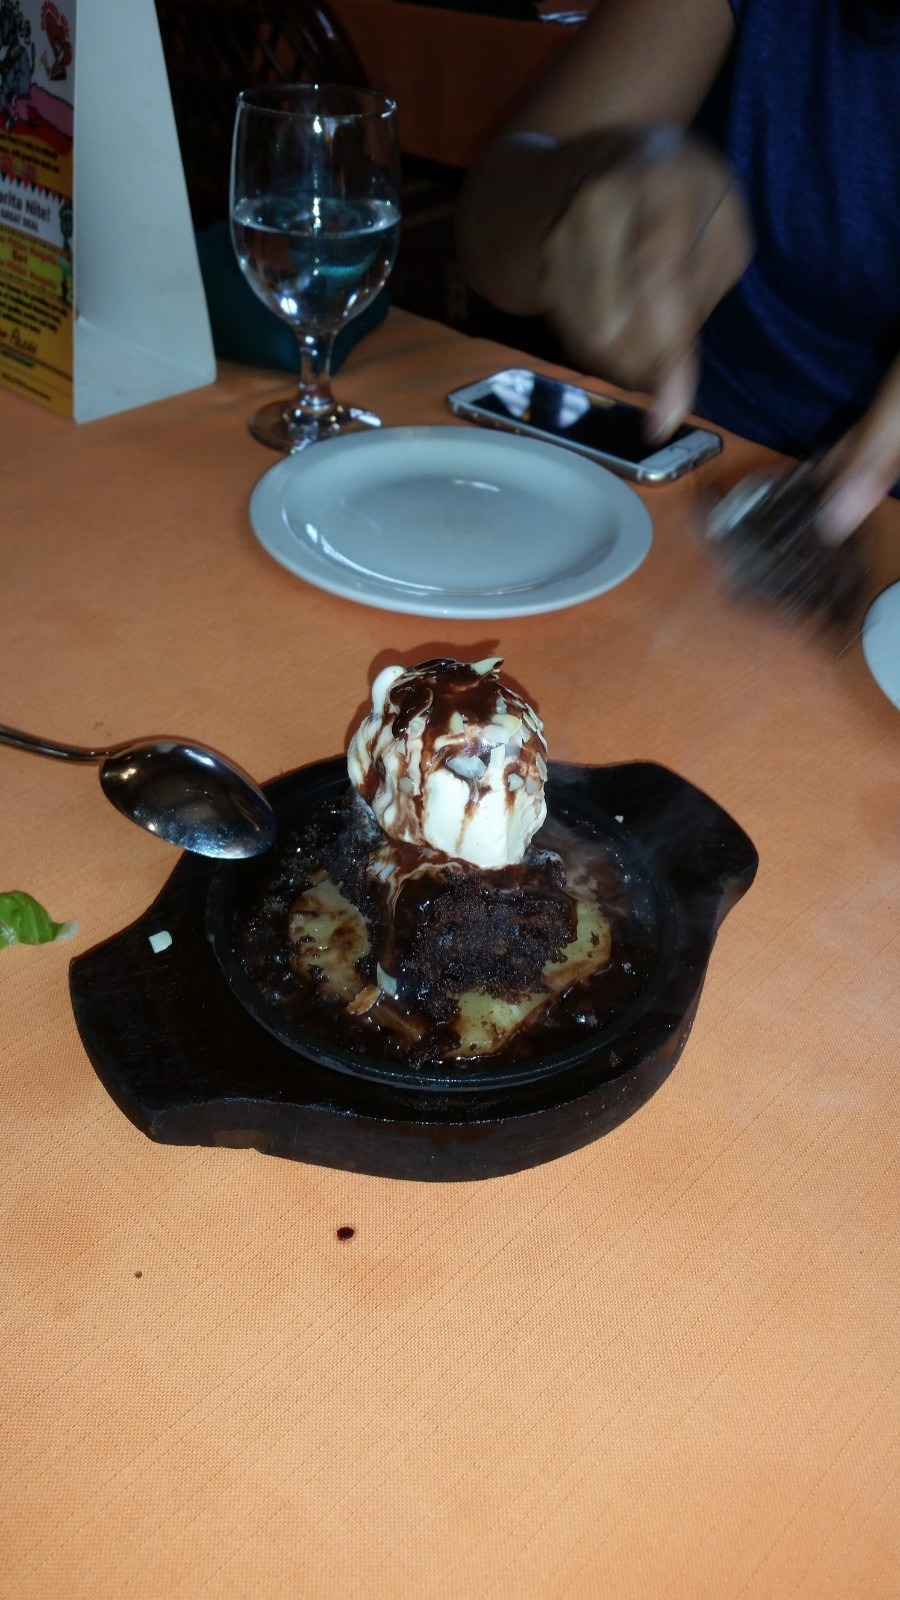 Sizzling brownie with ice cream @ The Warbler - Bahrain